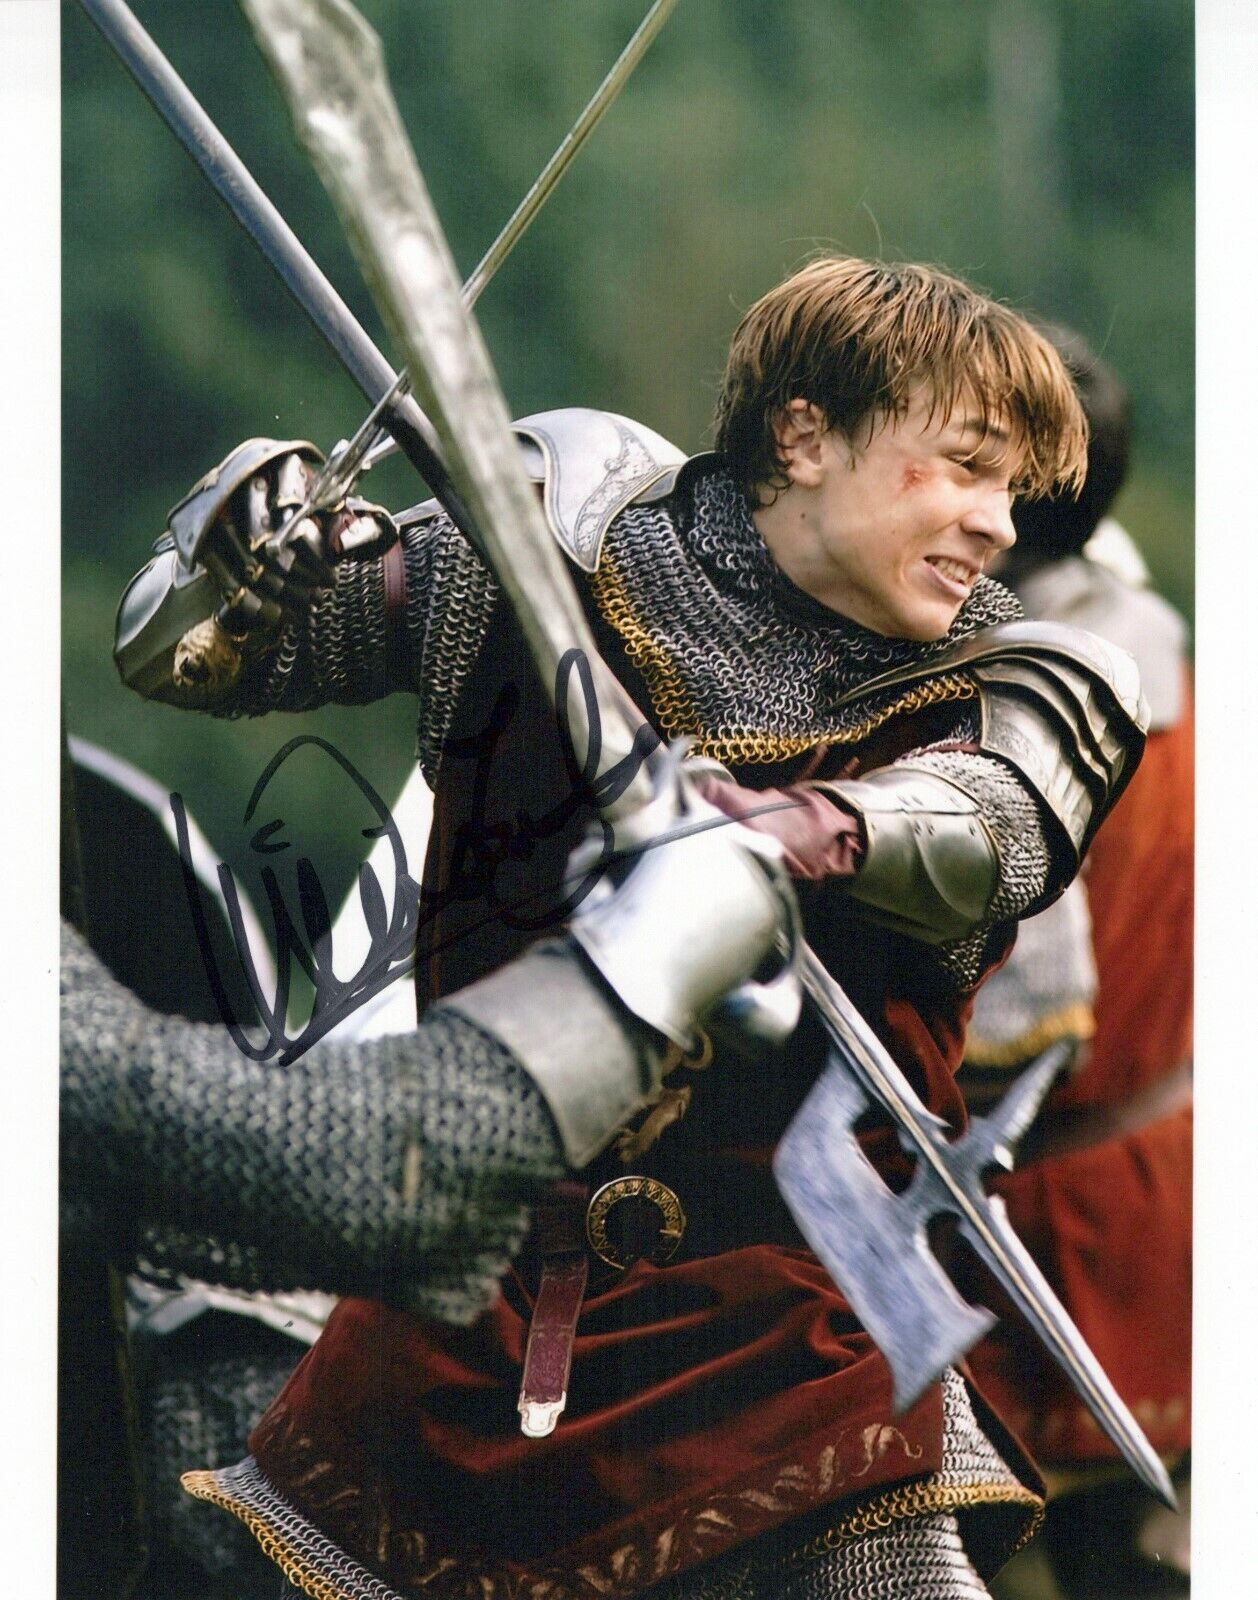 William Moseley The Chronicles Of Narnia autographed Photo Poster painting signed 8x10 #2 Peter